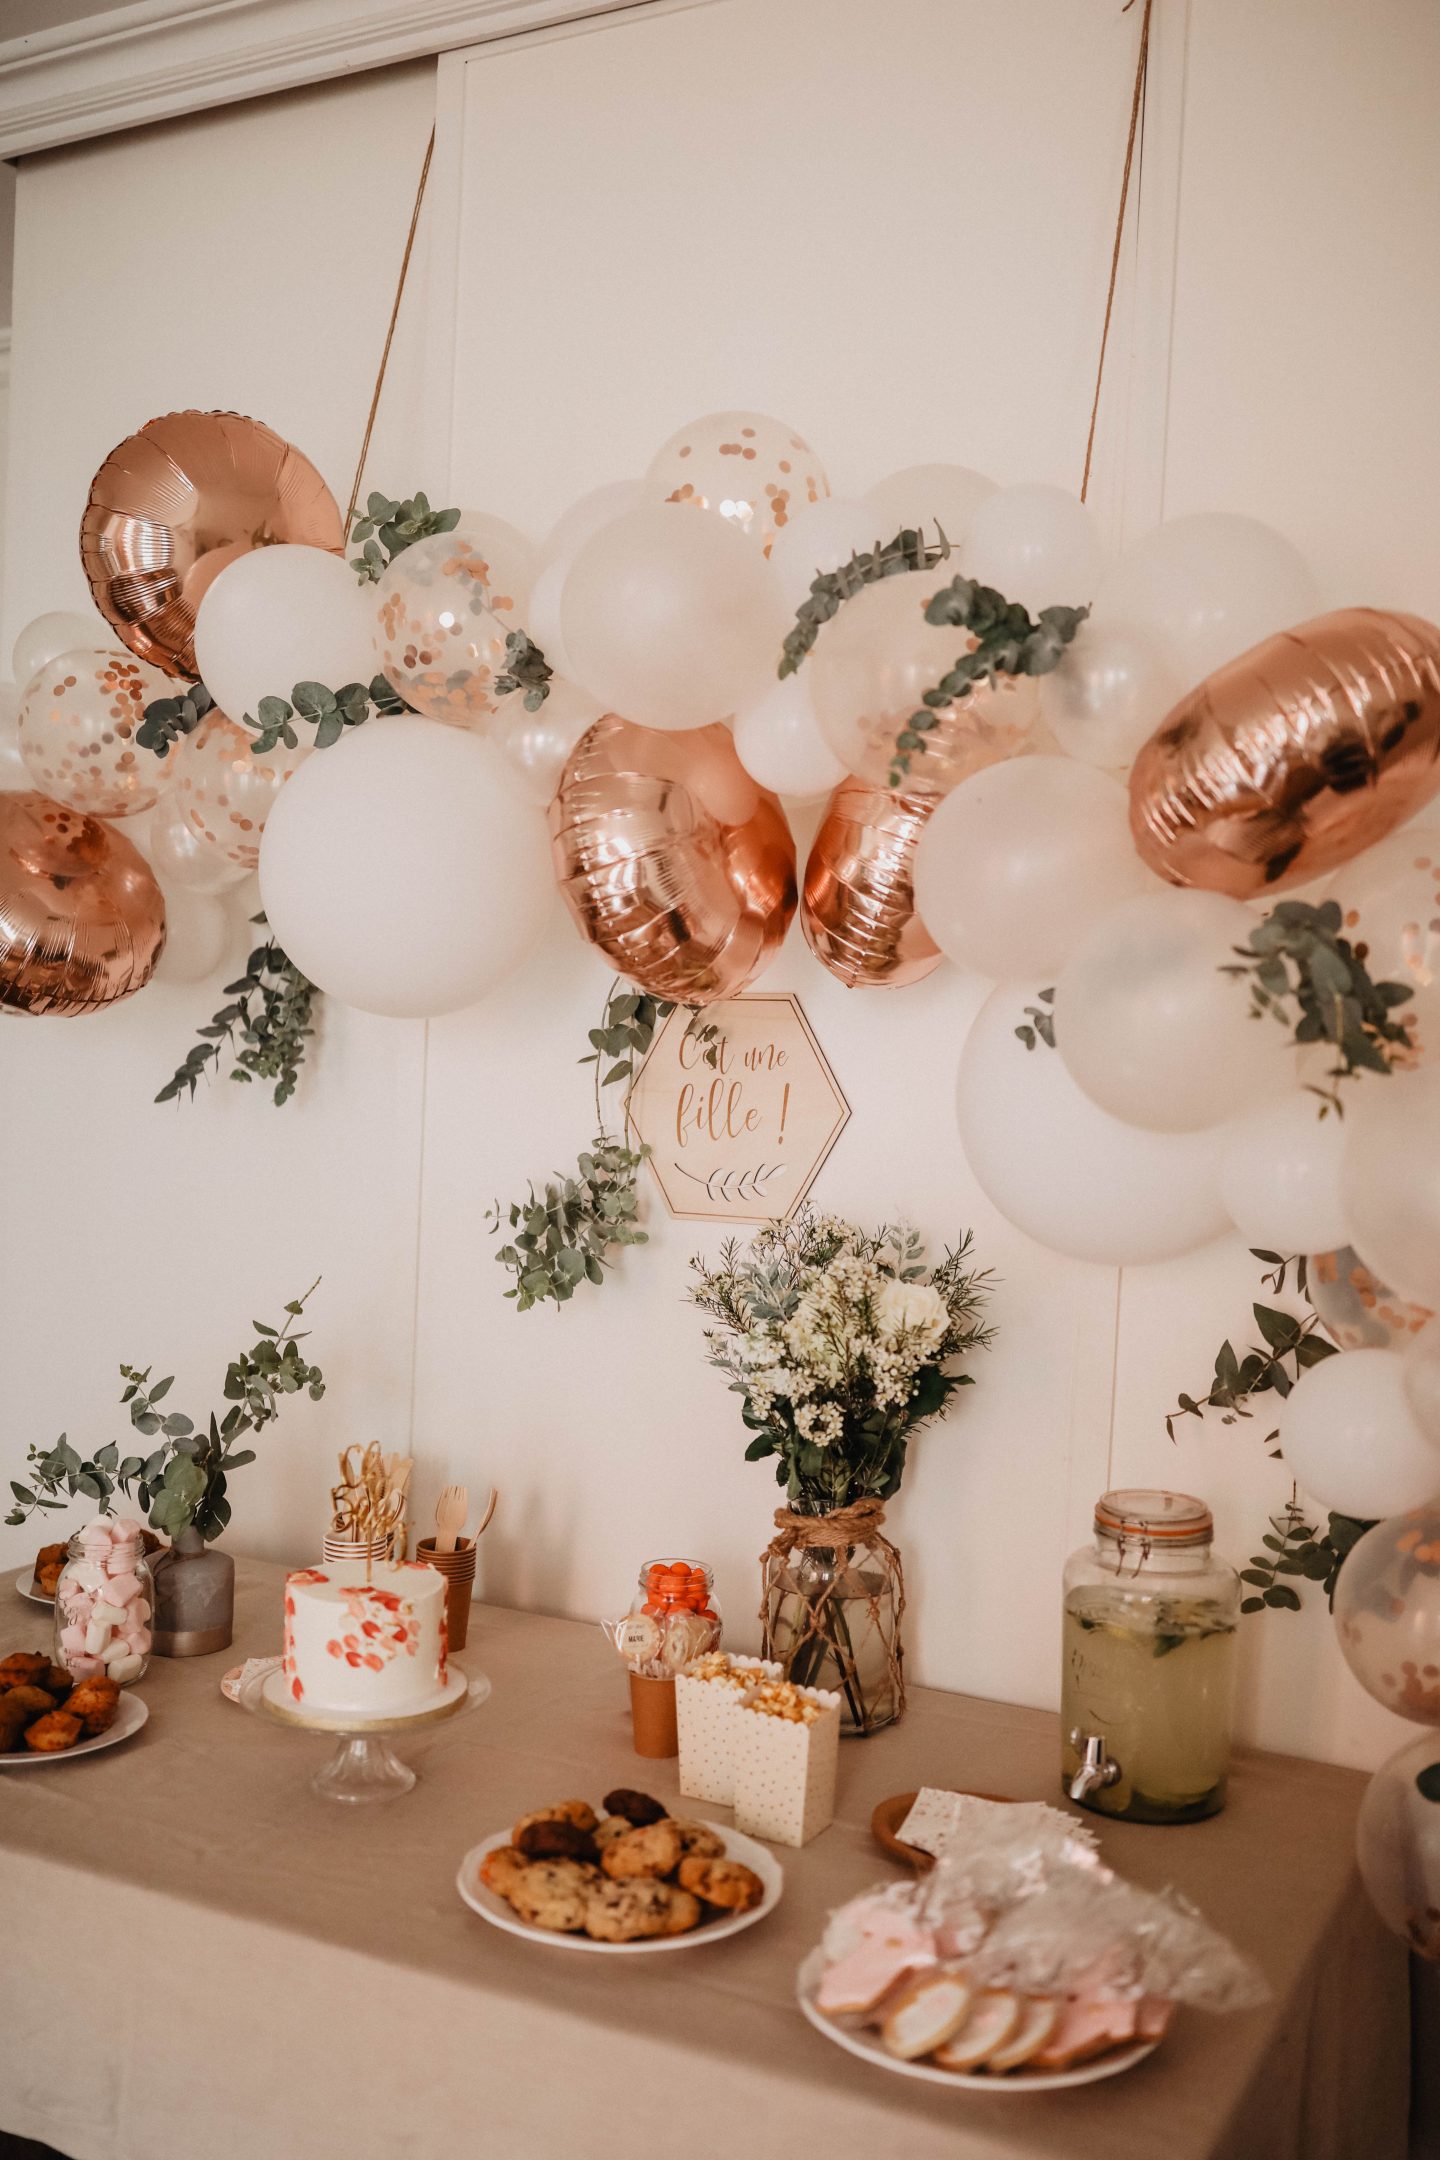 Baby Shower - Deco & food - Marie and Mood - Blog mode lifestyle